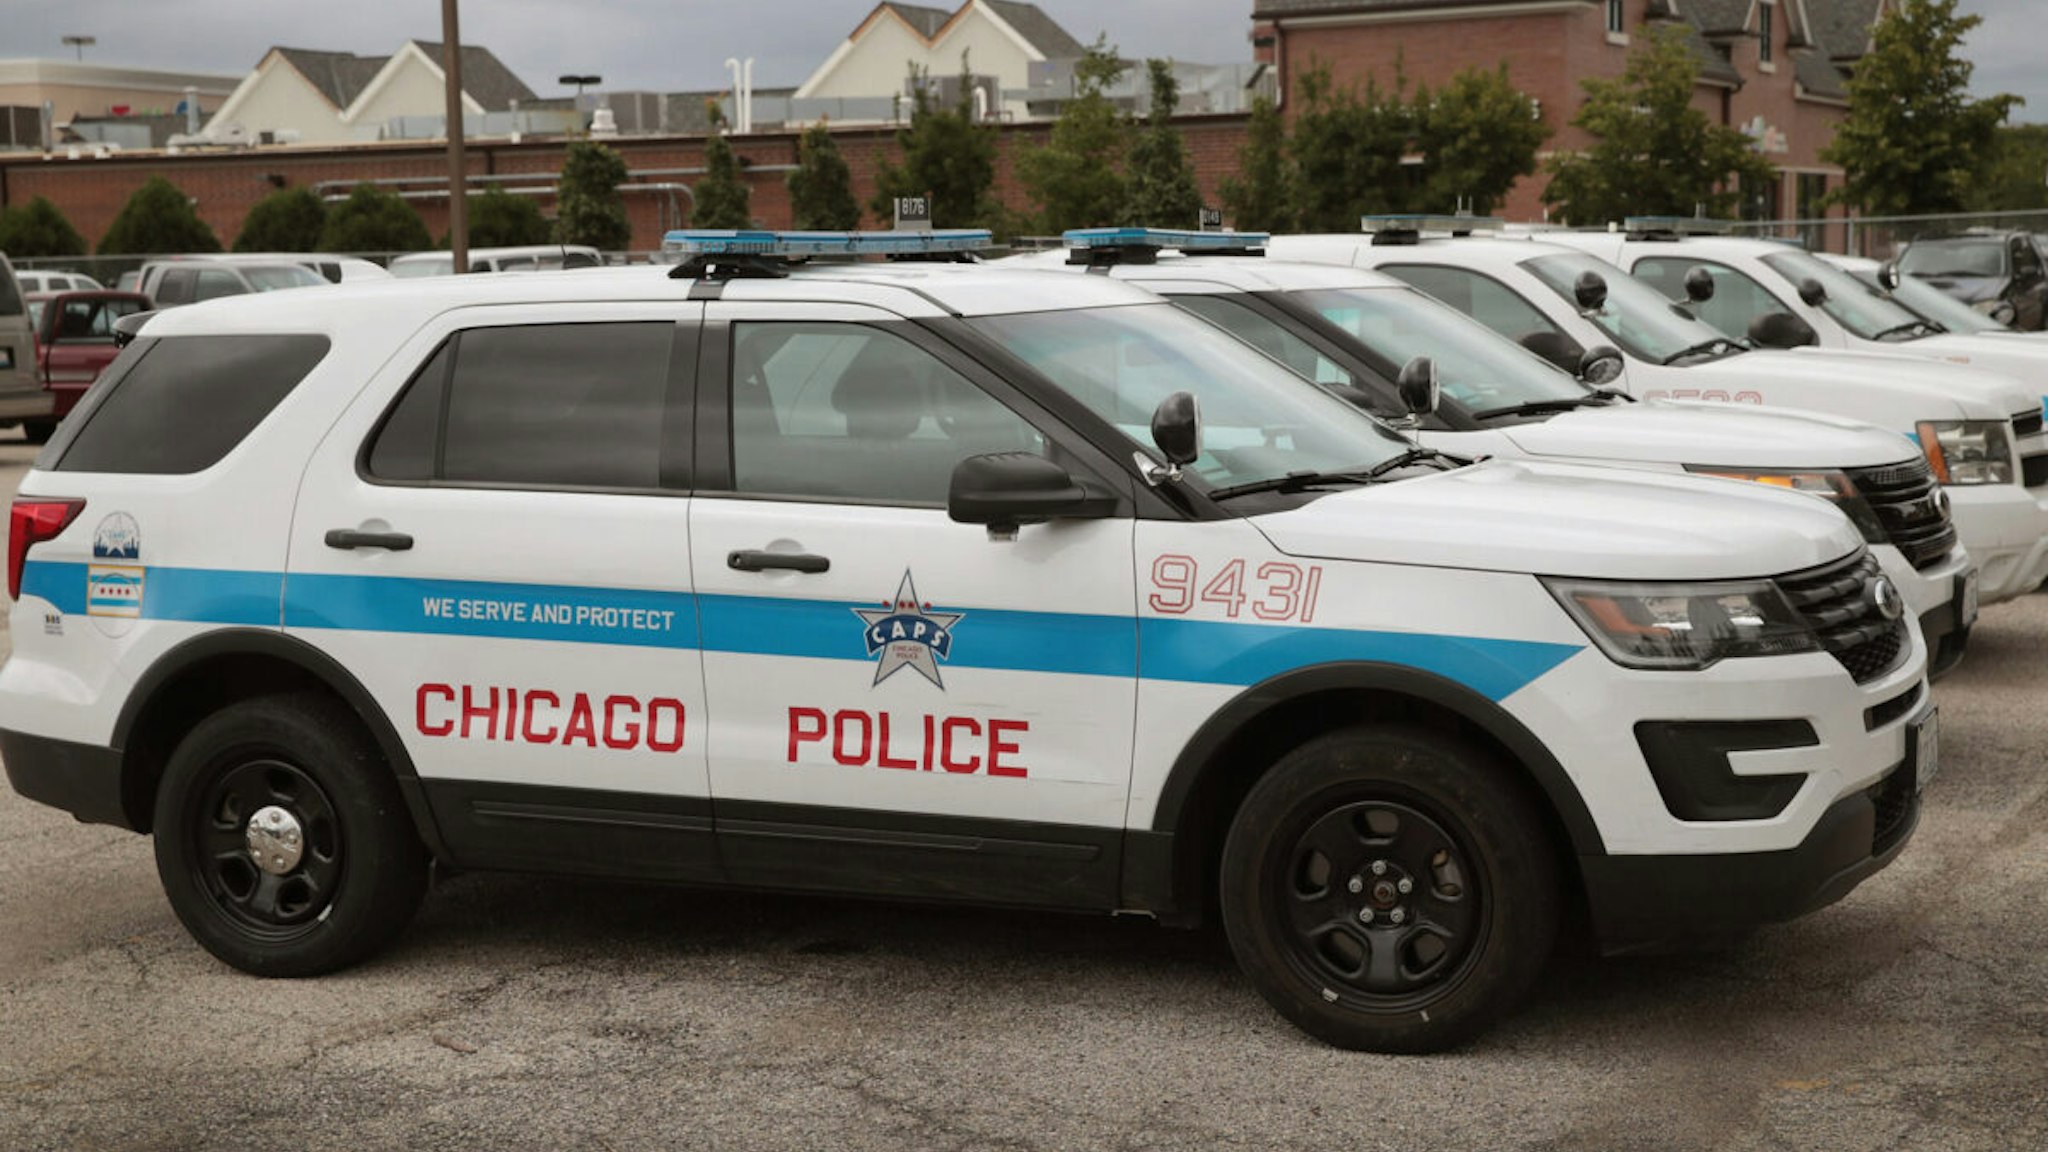 Ford Explorer based Police Interceptors sit in a police station parking lot on August 4, 2017 in Chicago, Illinois.